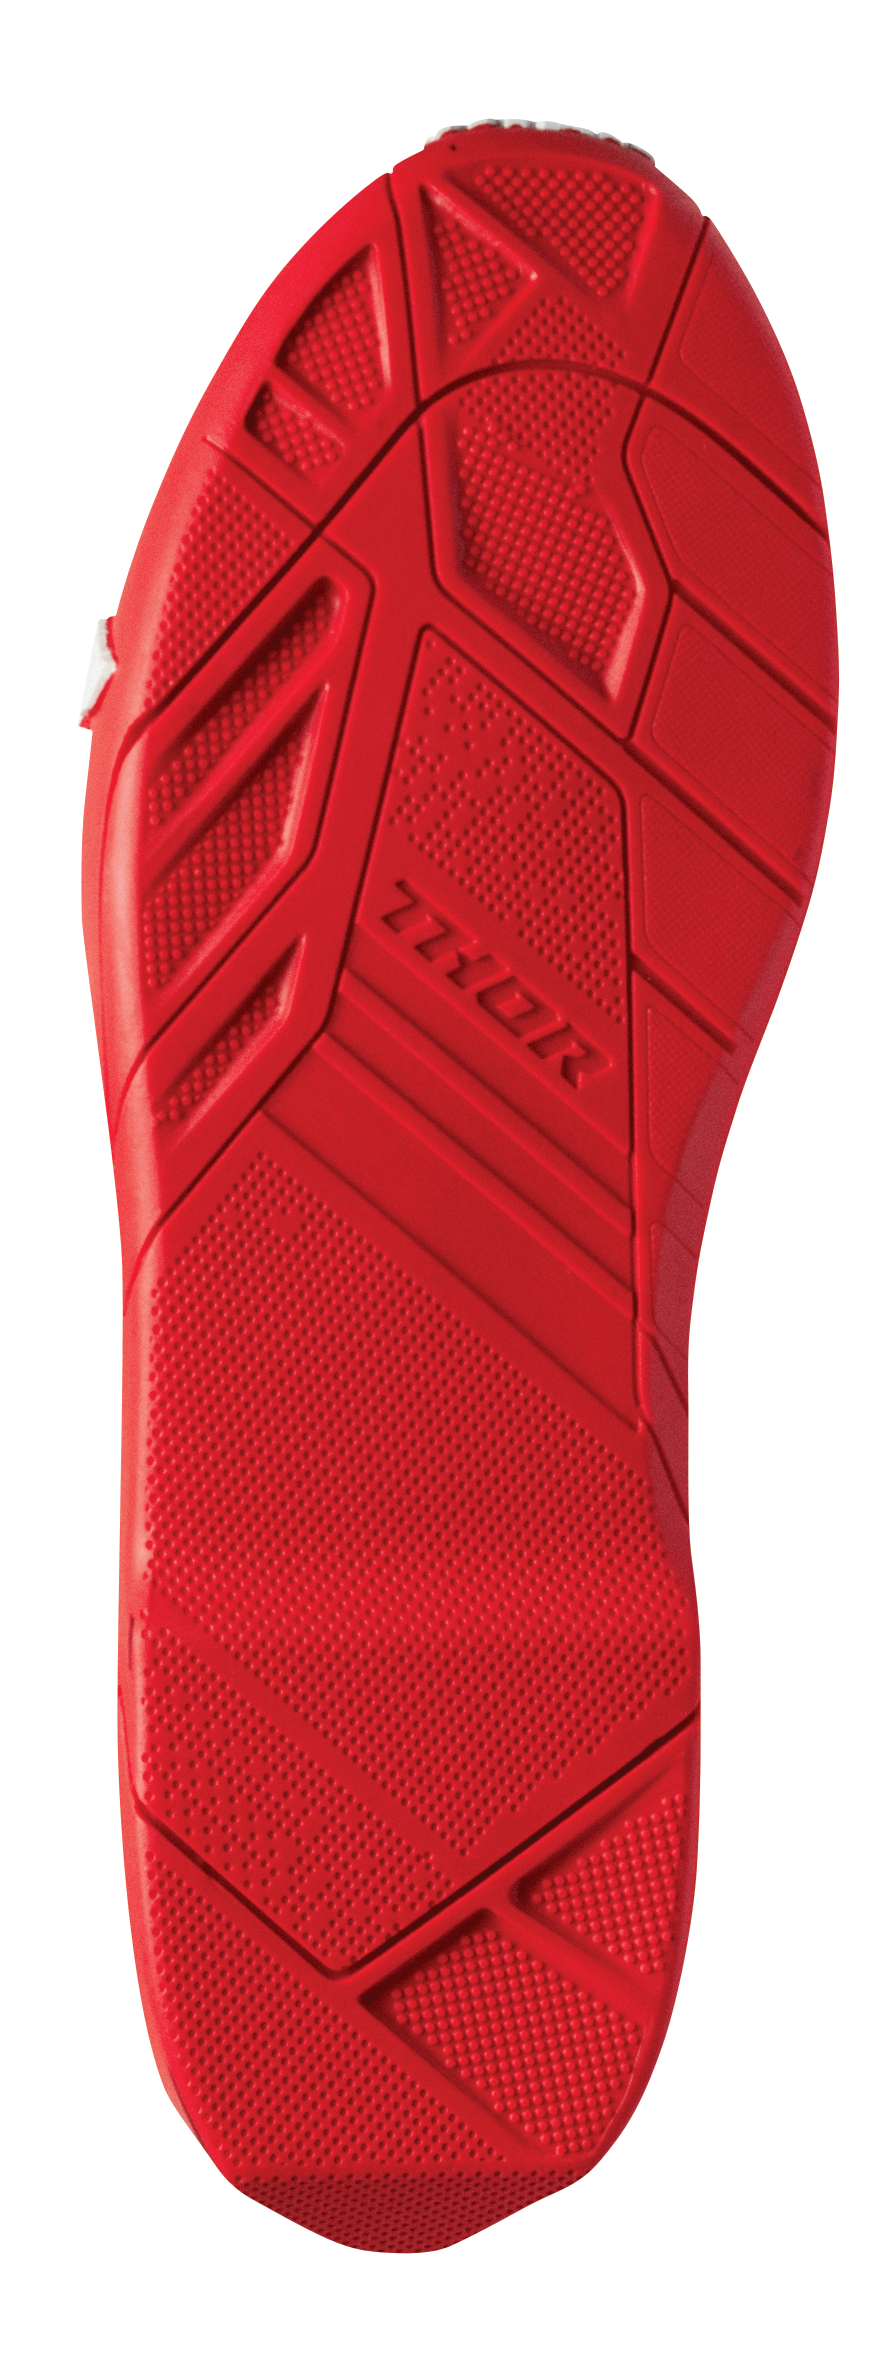 THOR Radial Boots Replacement Outsoles - Red - Size 9 3430-0998